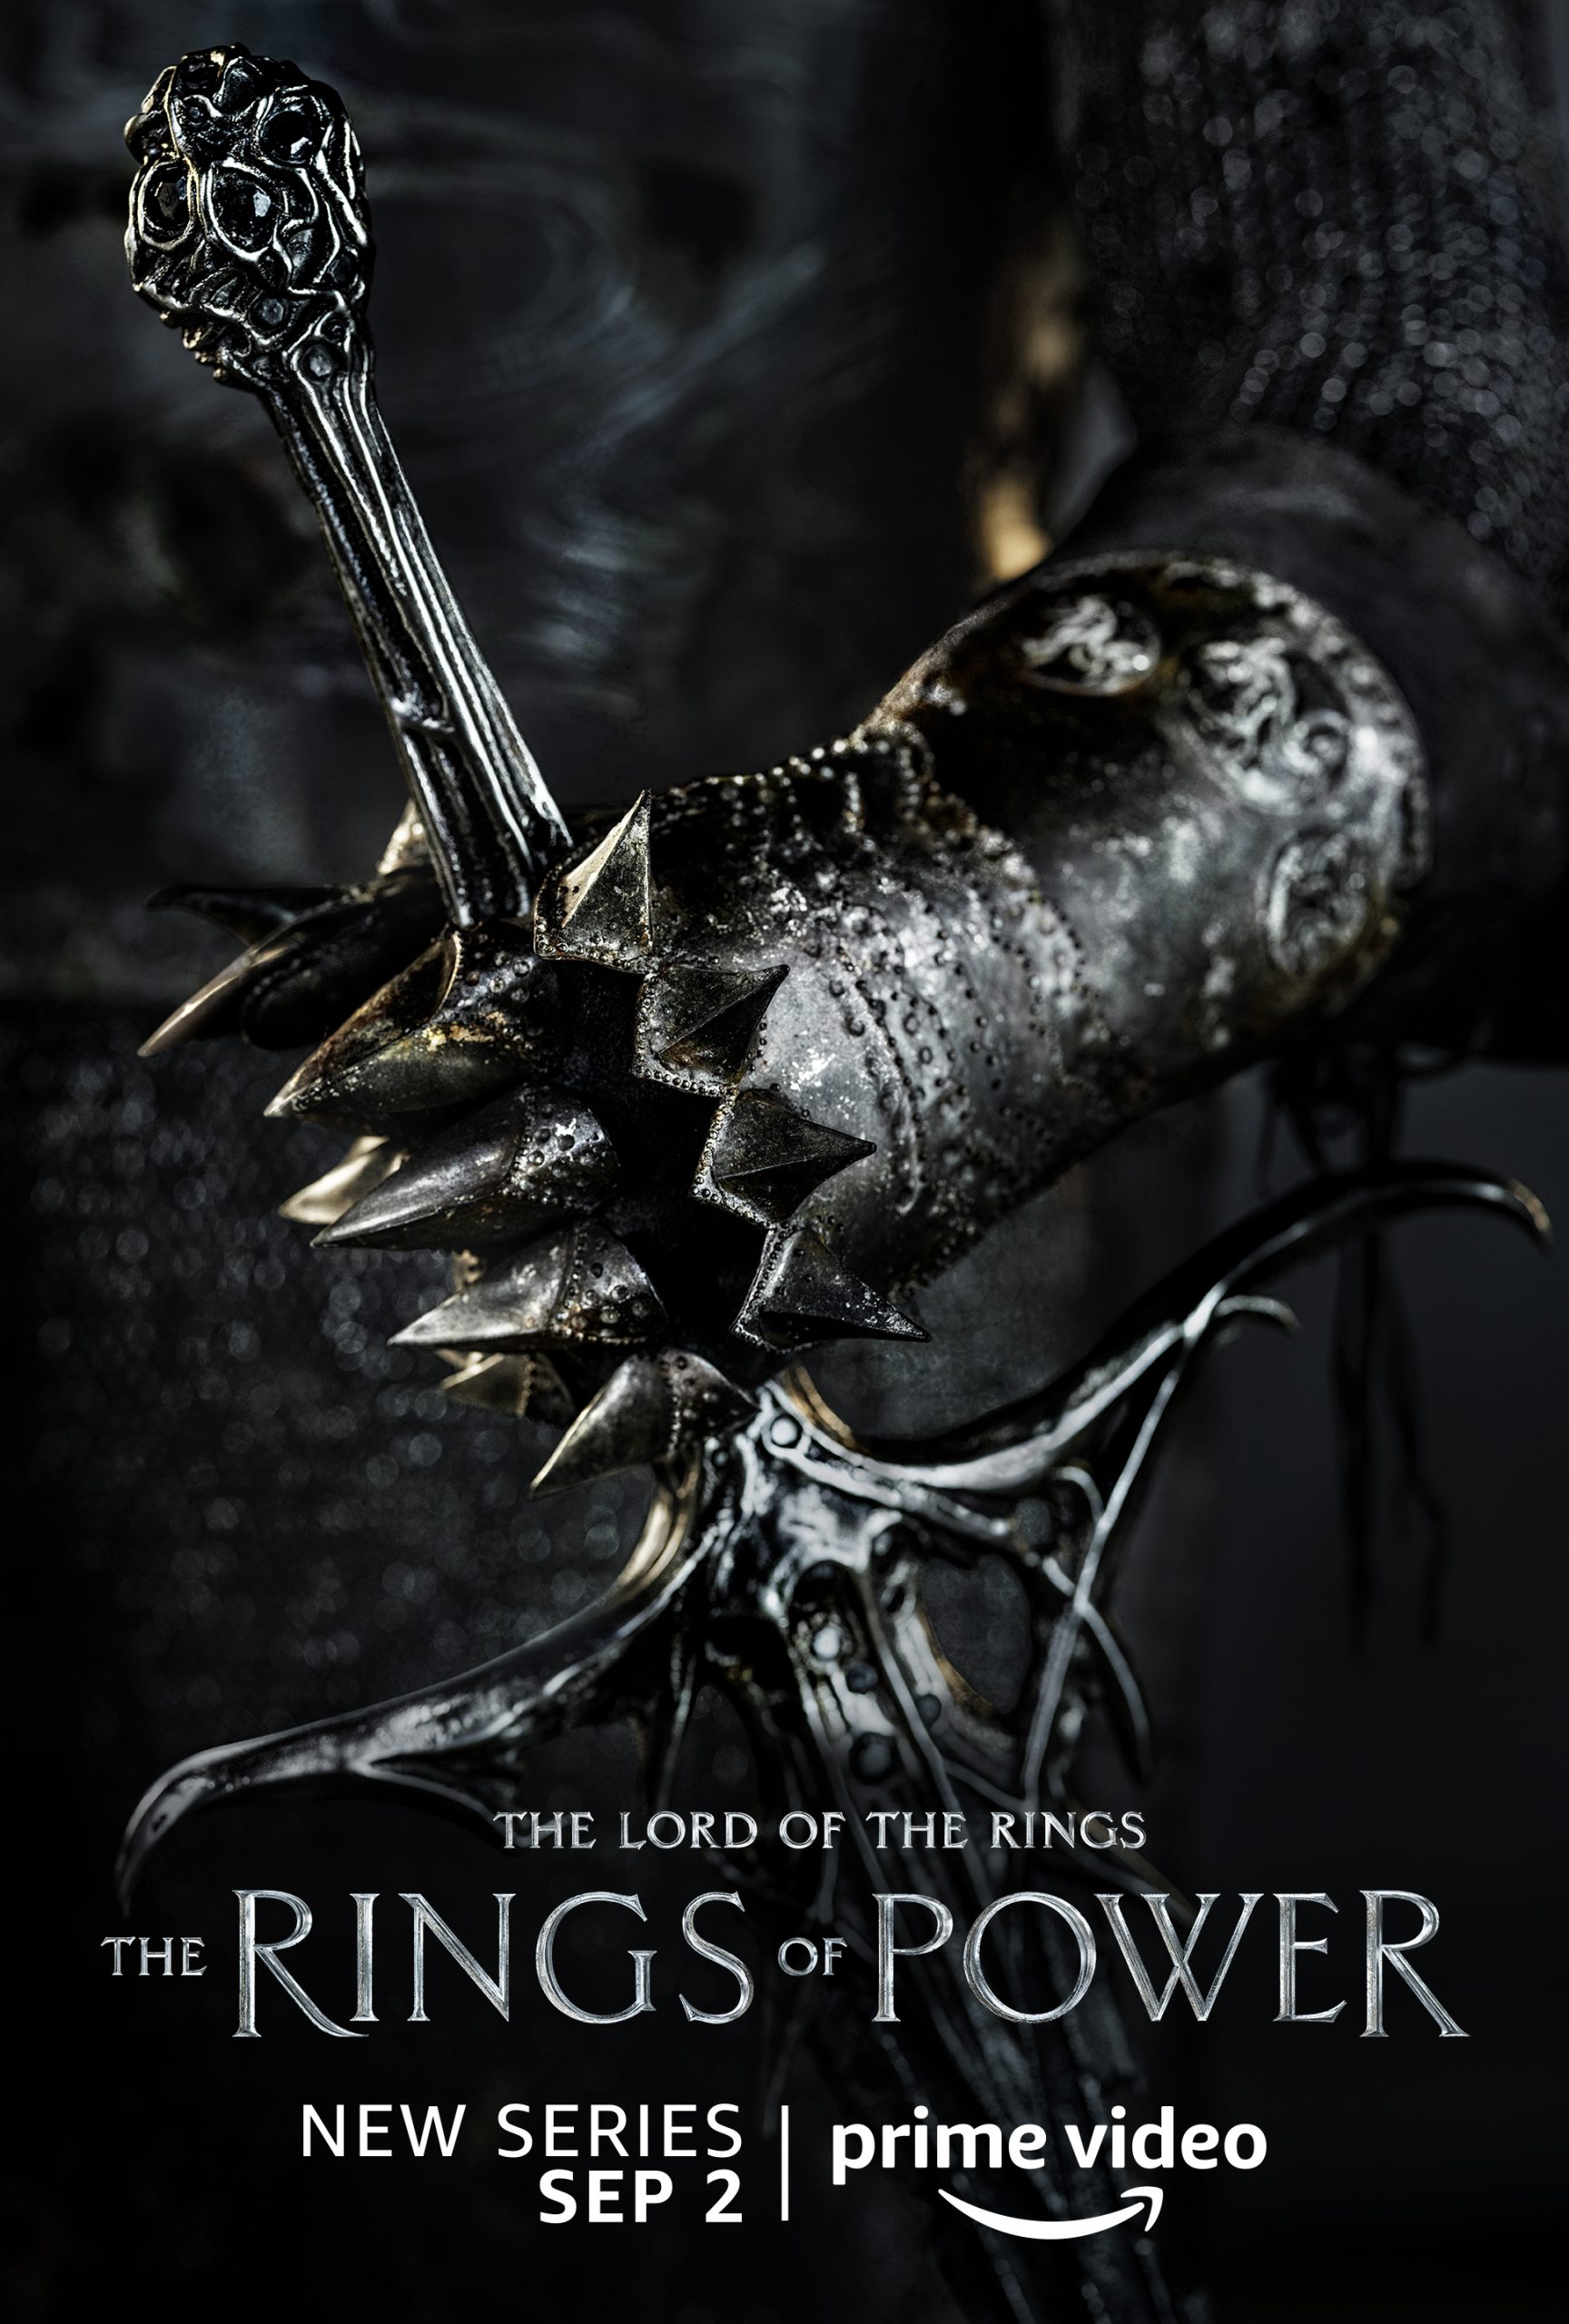 The Lord of the Rings: The Rings of Power (Season 1)